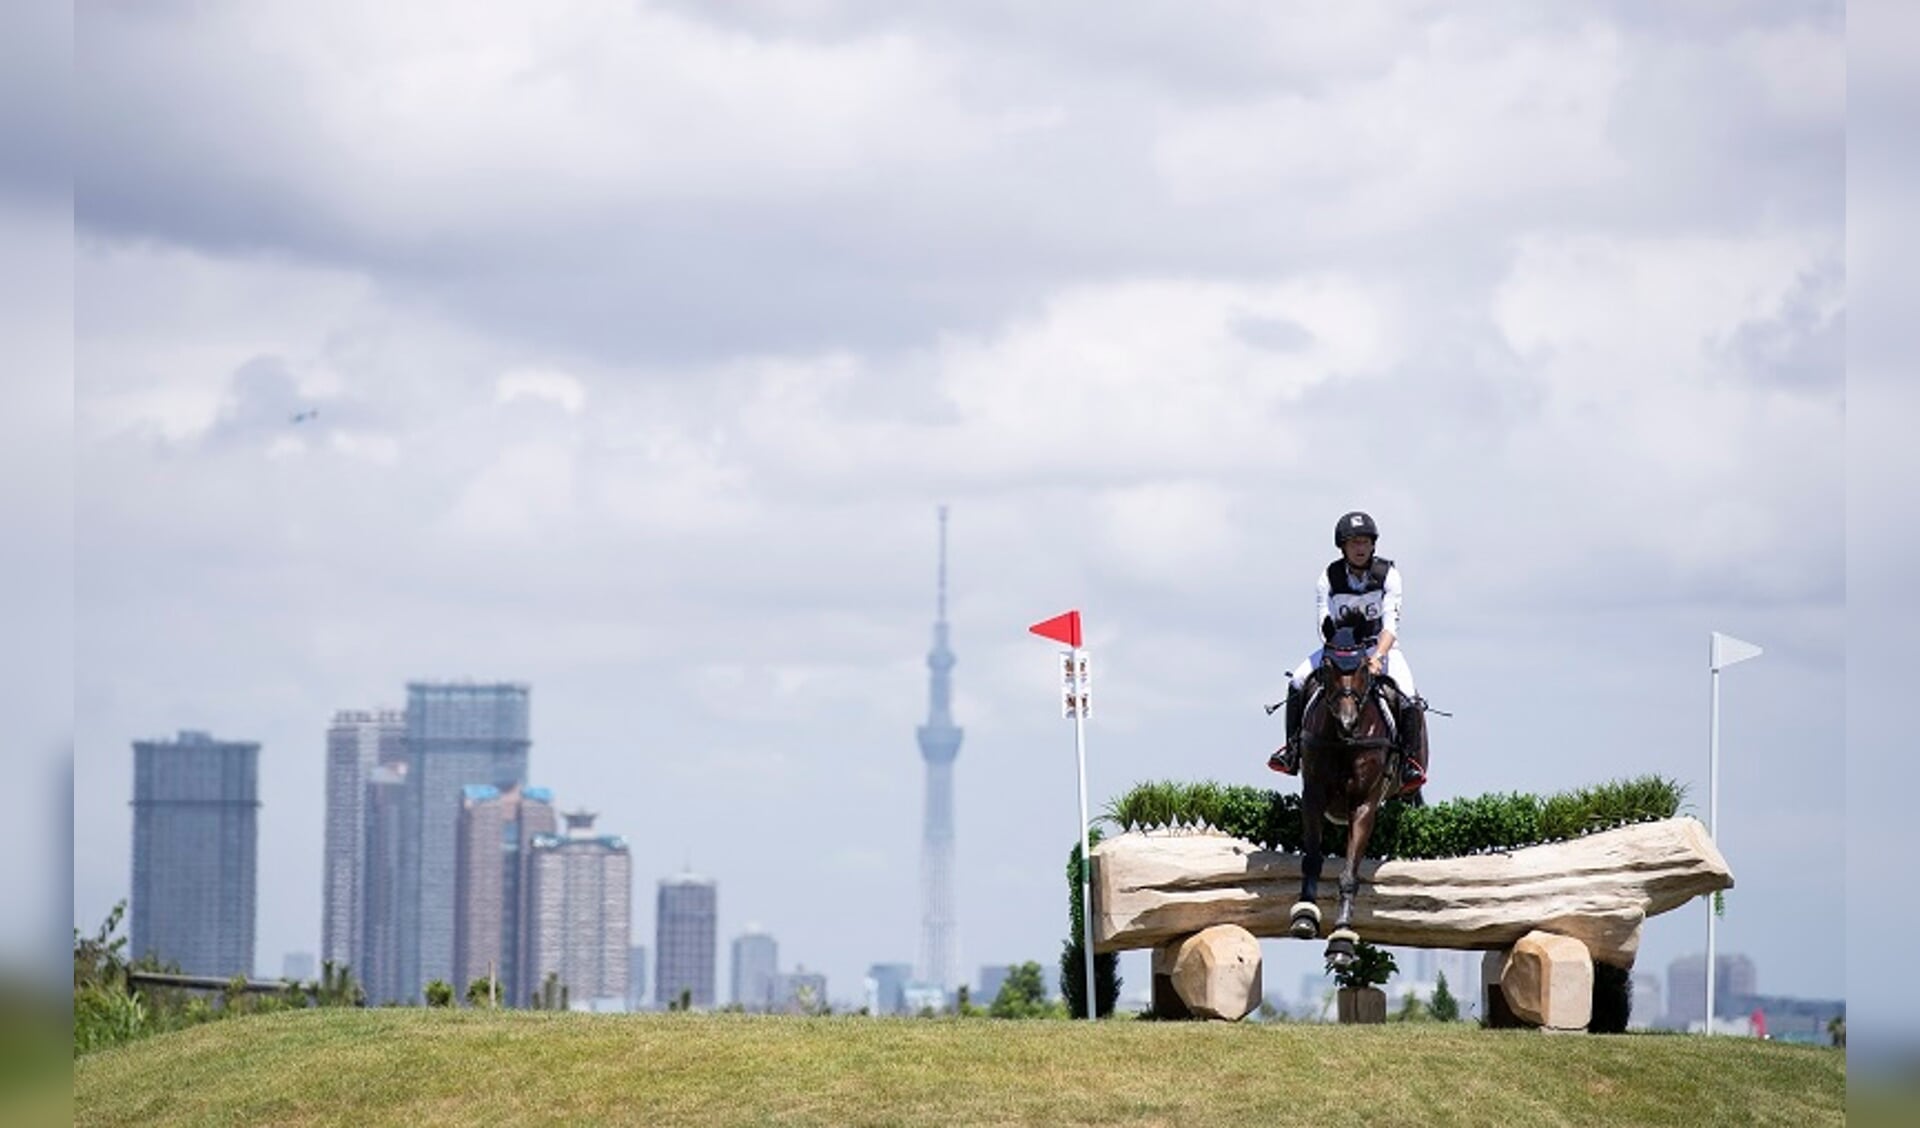 TOKYO, JAPAN - AUGUST 13 : Jung Michael & FISCHERWILD WAVE of GER in the Cross Country  NO.17-A during the READY SRADY TOKYO Equestrian test event 
 at the Sea forest Park on August 13, 2019 in Tokyo, Japan. (Photo by Yusuke Nakanishi)